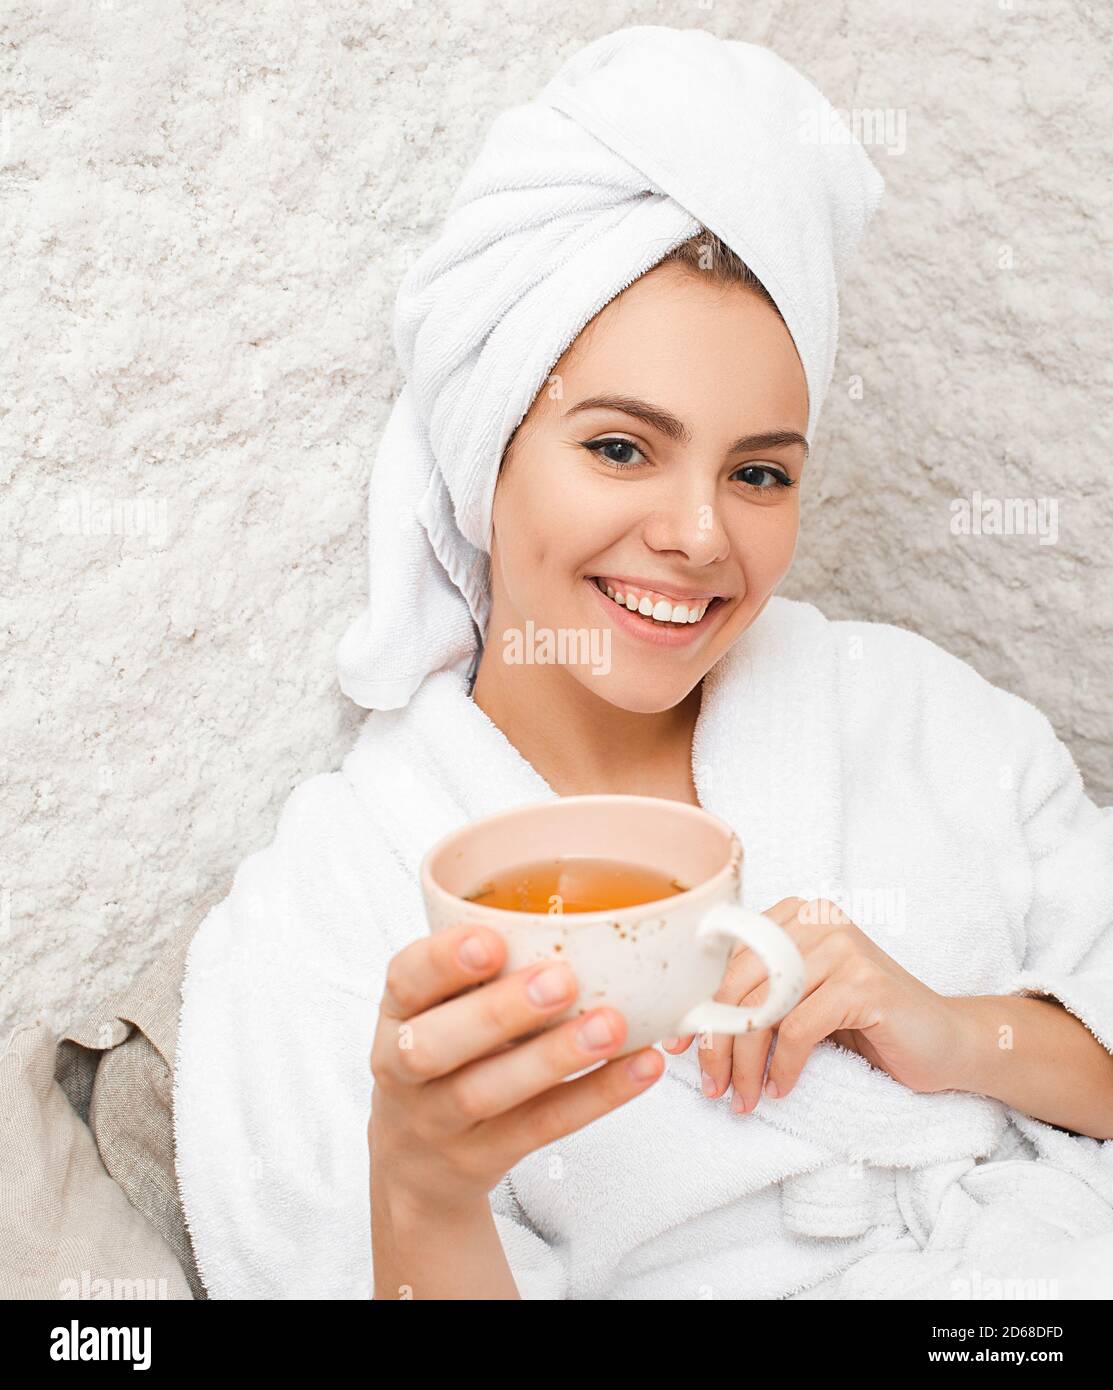 Salt air treatment in the salt room. Beautiful woman drinking tea and being treated at the spa salt room Stock Photo